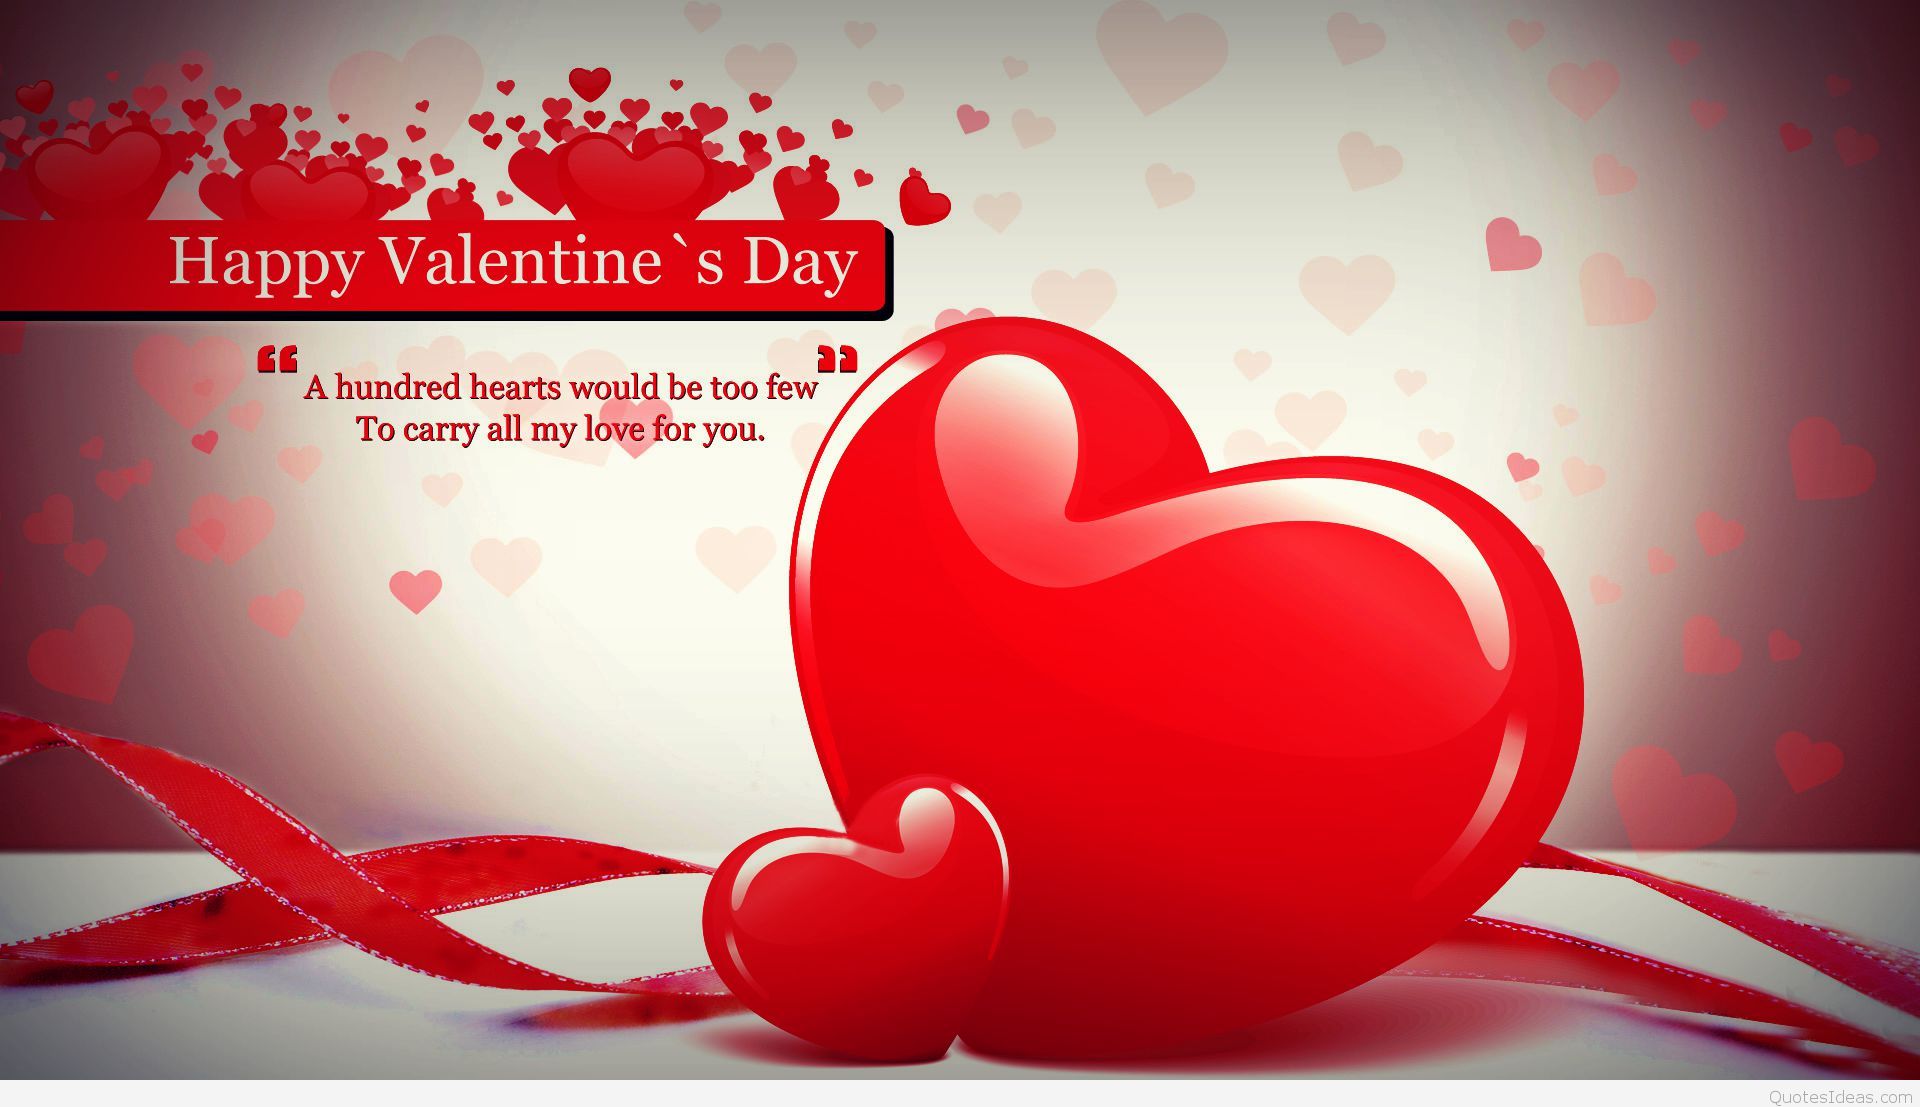 Happy Valentines Day Quotes For Work - HD Wallpaper 